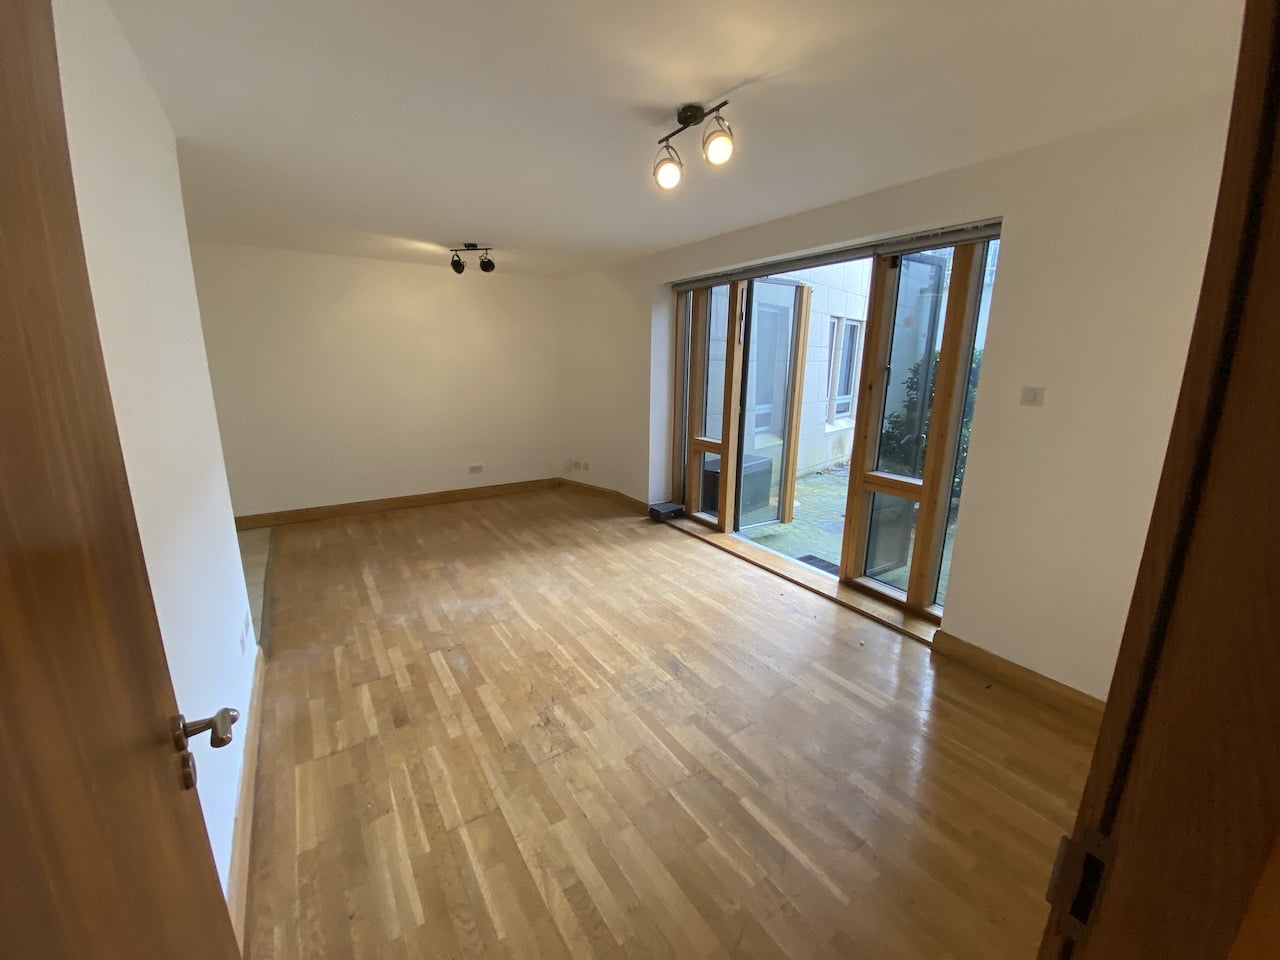 TO LET – Quality 1 Double Bedroom Apartment, Coliemore Rd, Dalkey, Co. Dublin